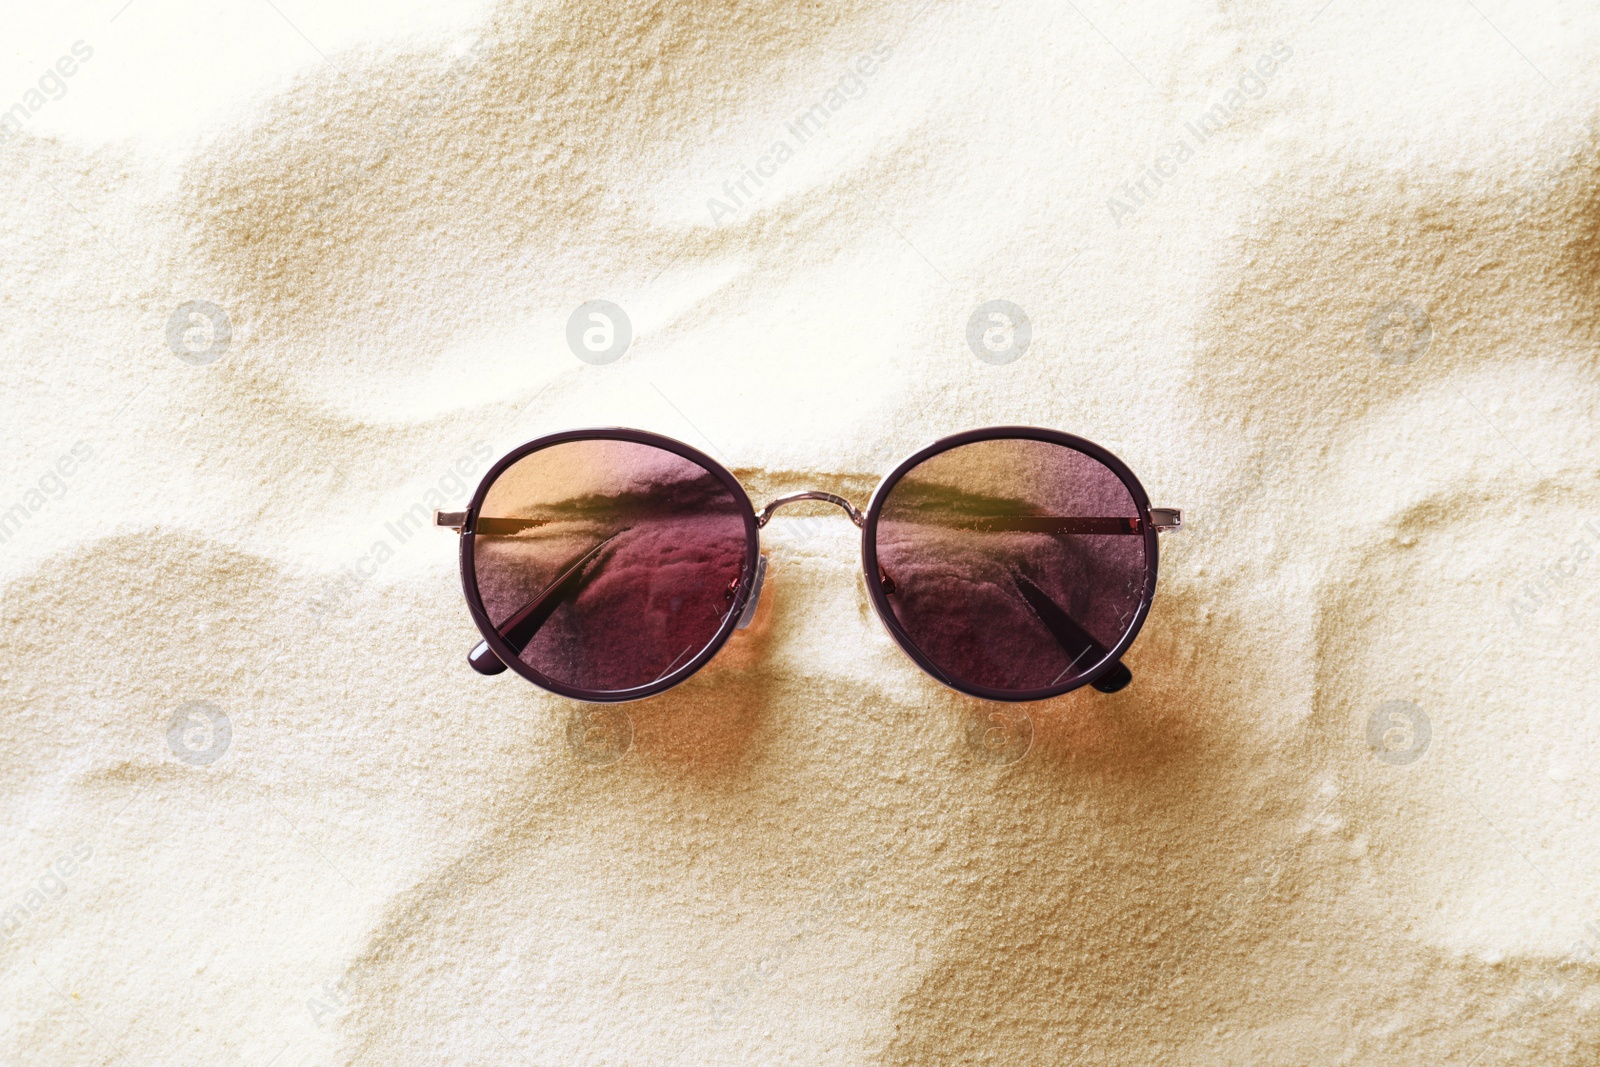 Photo of Stylish sunglasses on white sand, top view